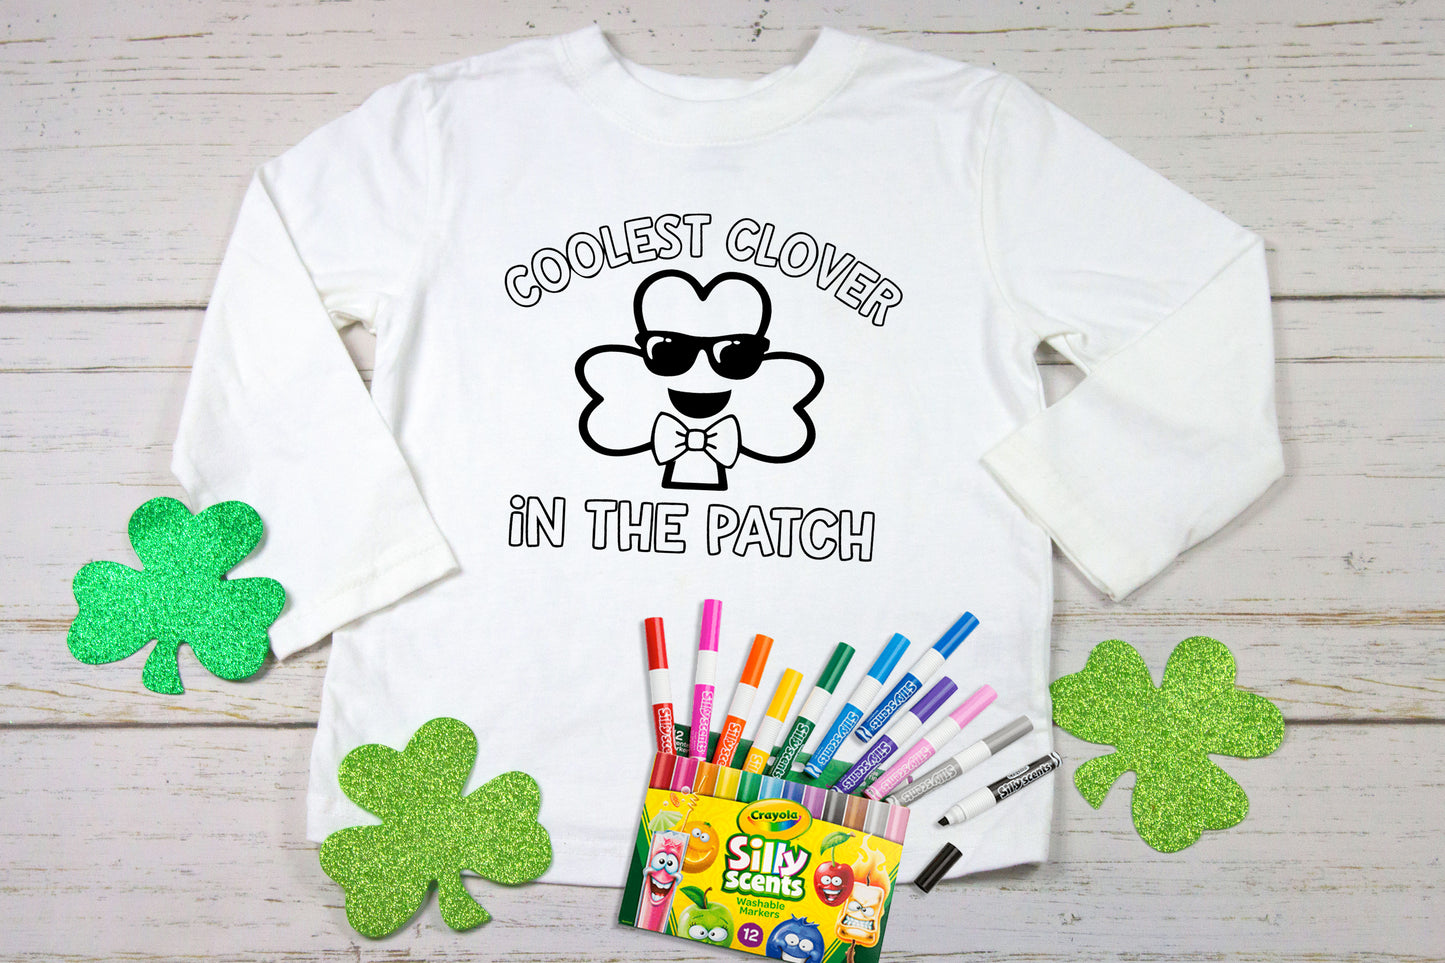 Coolest clover in the patch boy - Kids coloring